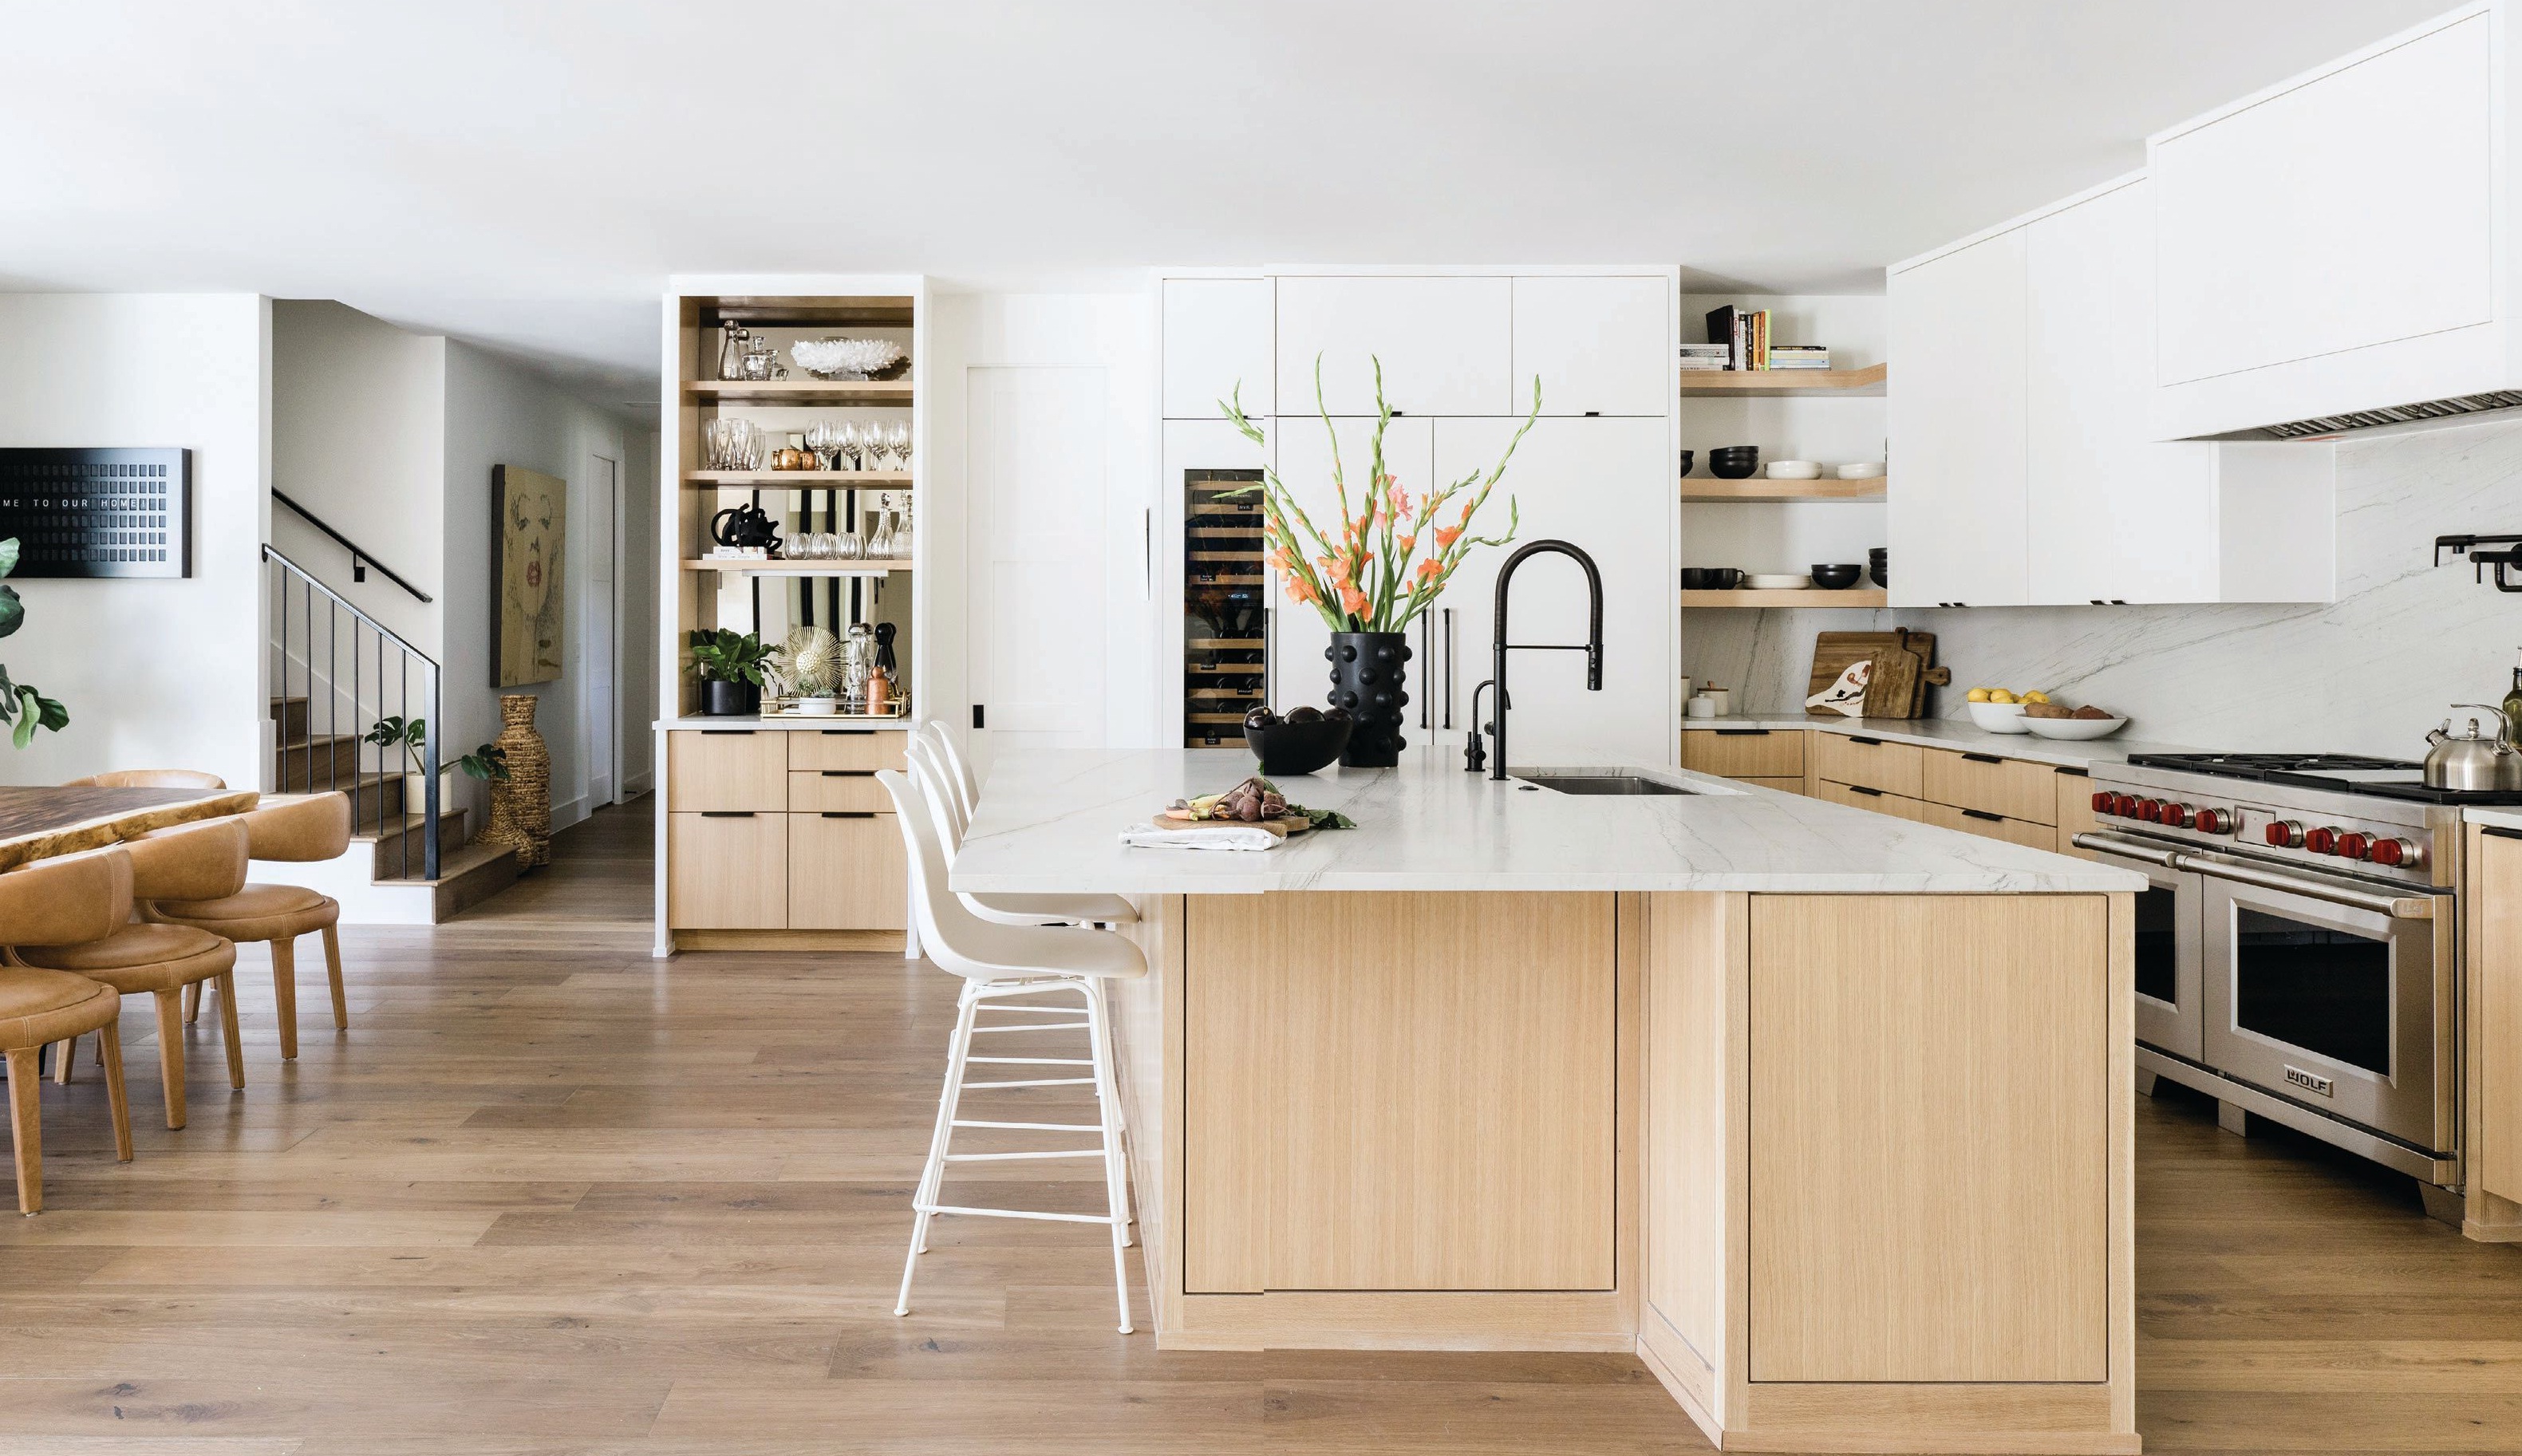 The spacious and airy kitchen features bar stools by DWR and modern cabinets by RiverCity Cabinets. PHOTOGRAPHED BY MADELINE HARPER